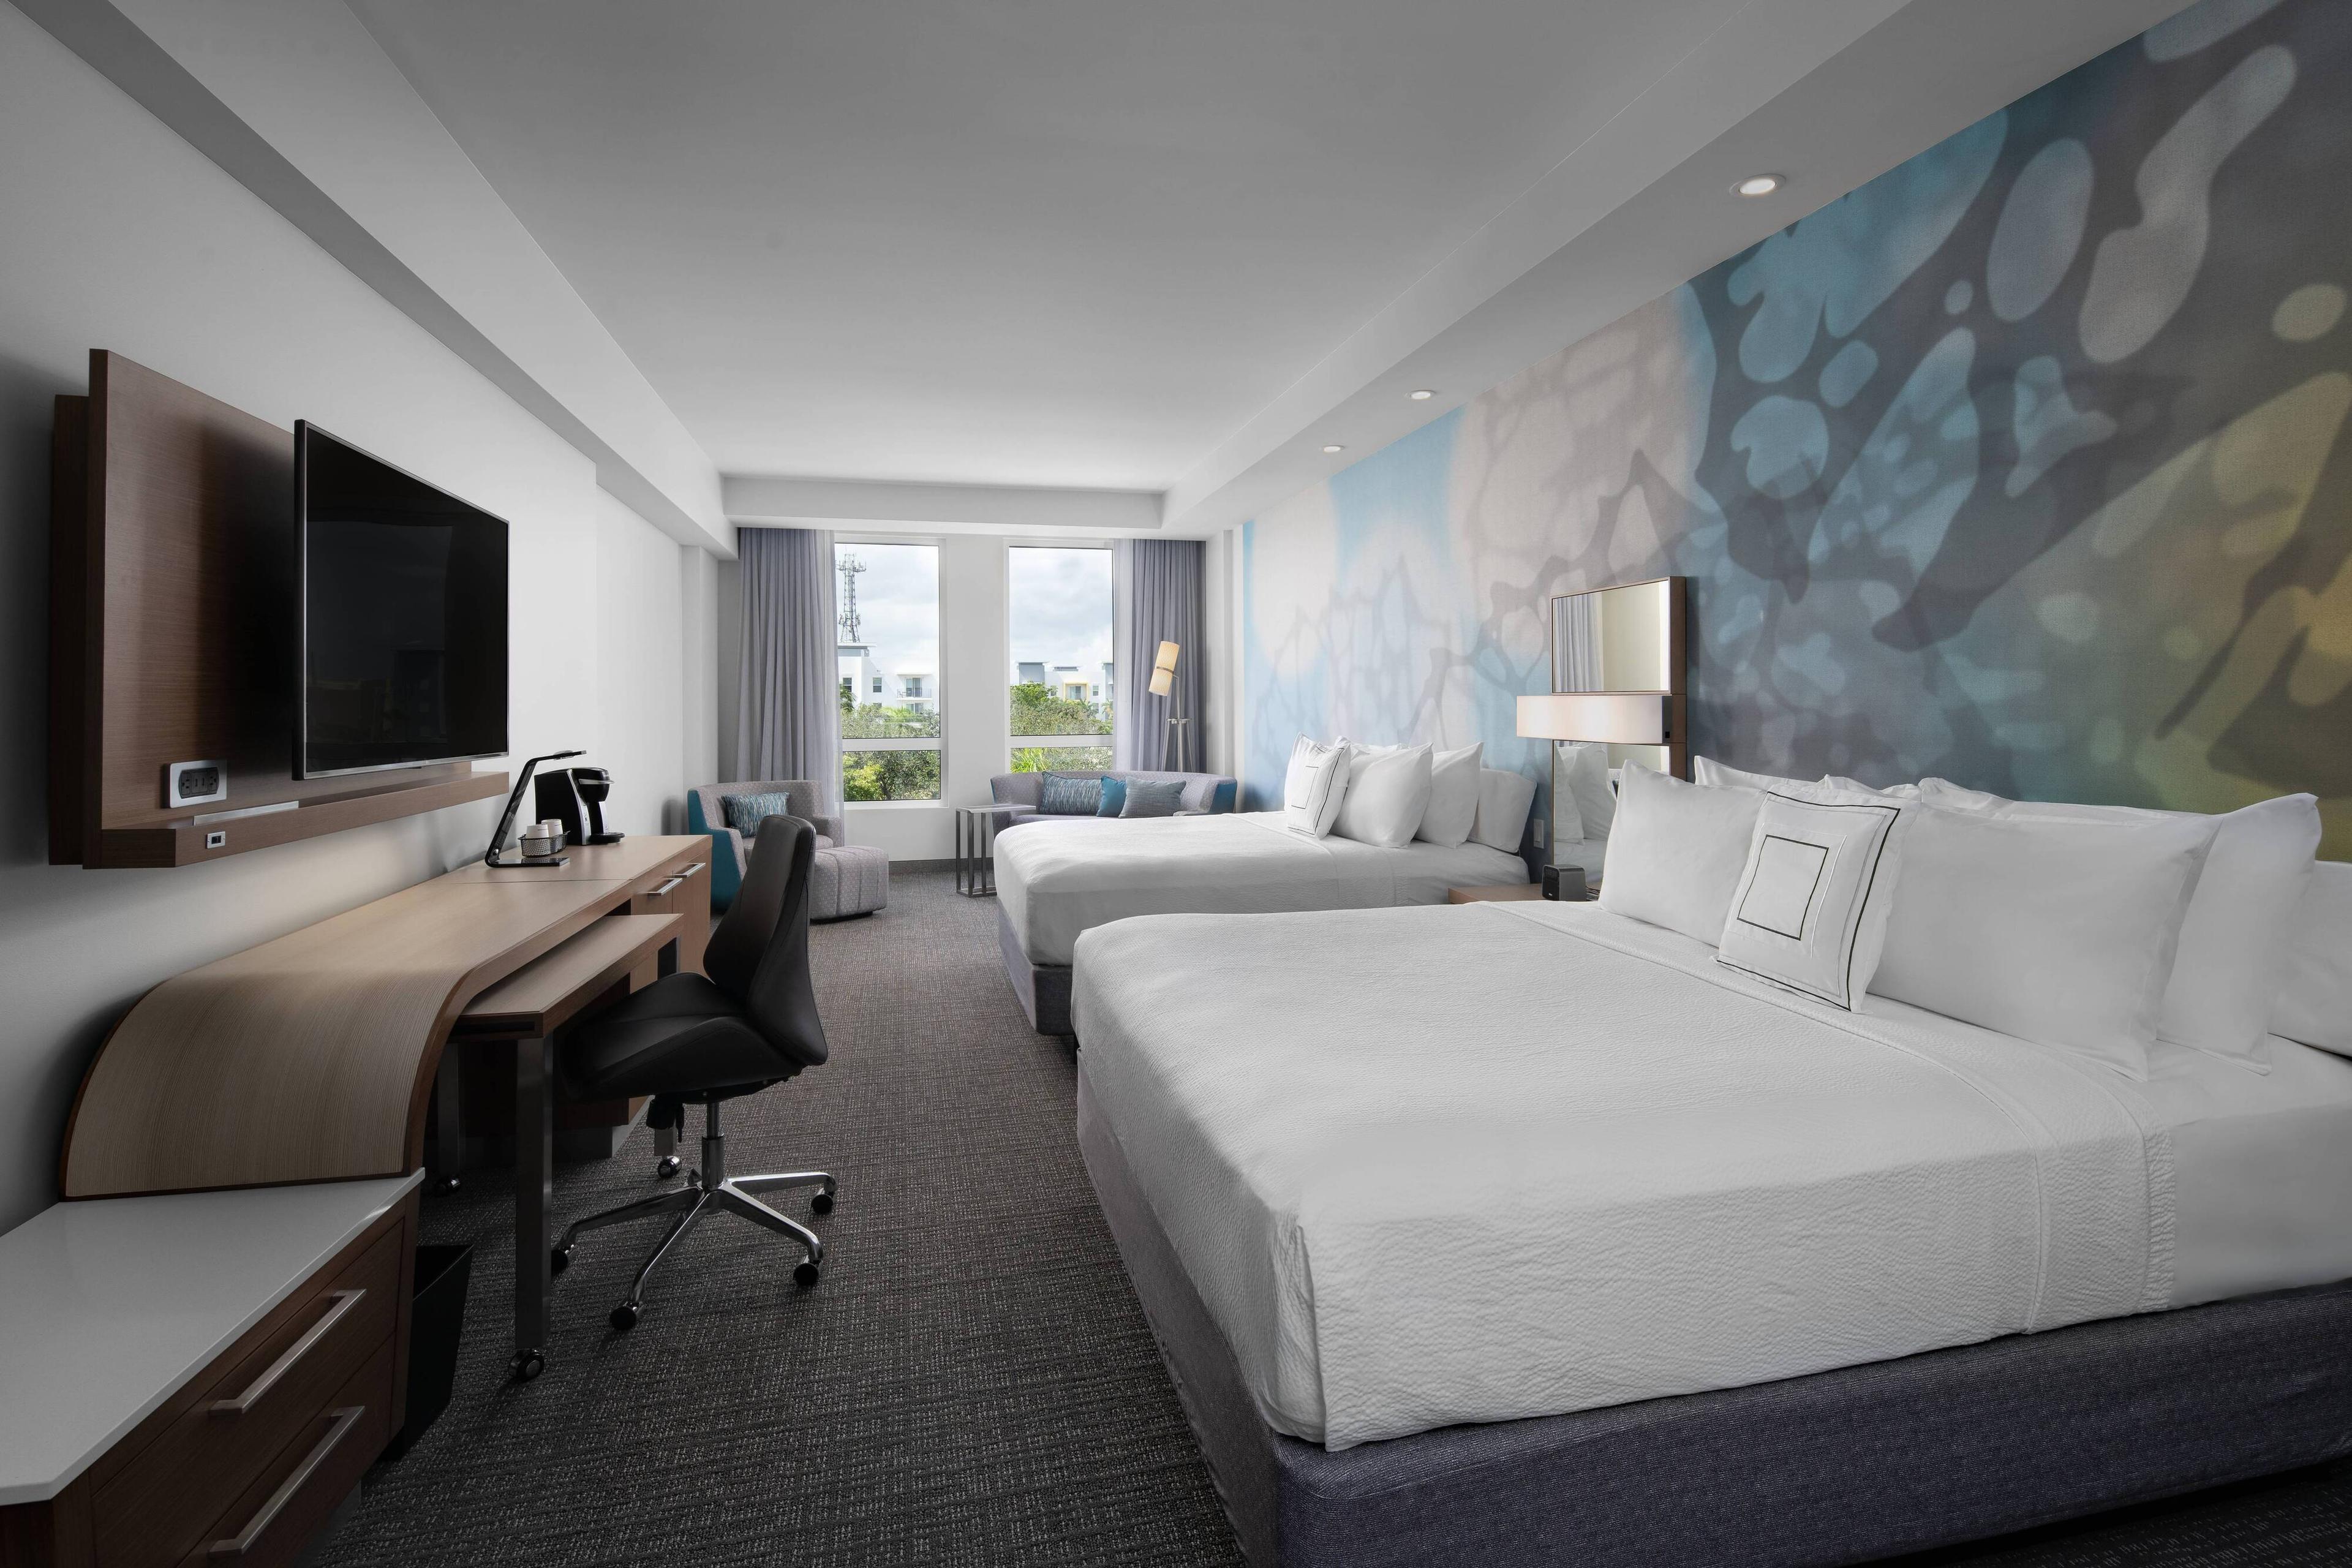 Our spacious guest rooms with two kind beds and sleeper sofa provide comfortable bedding, exciting amenities, and complimentary wireless Internet access.